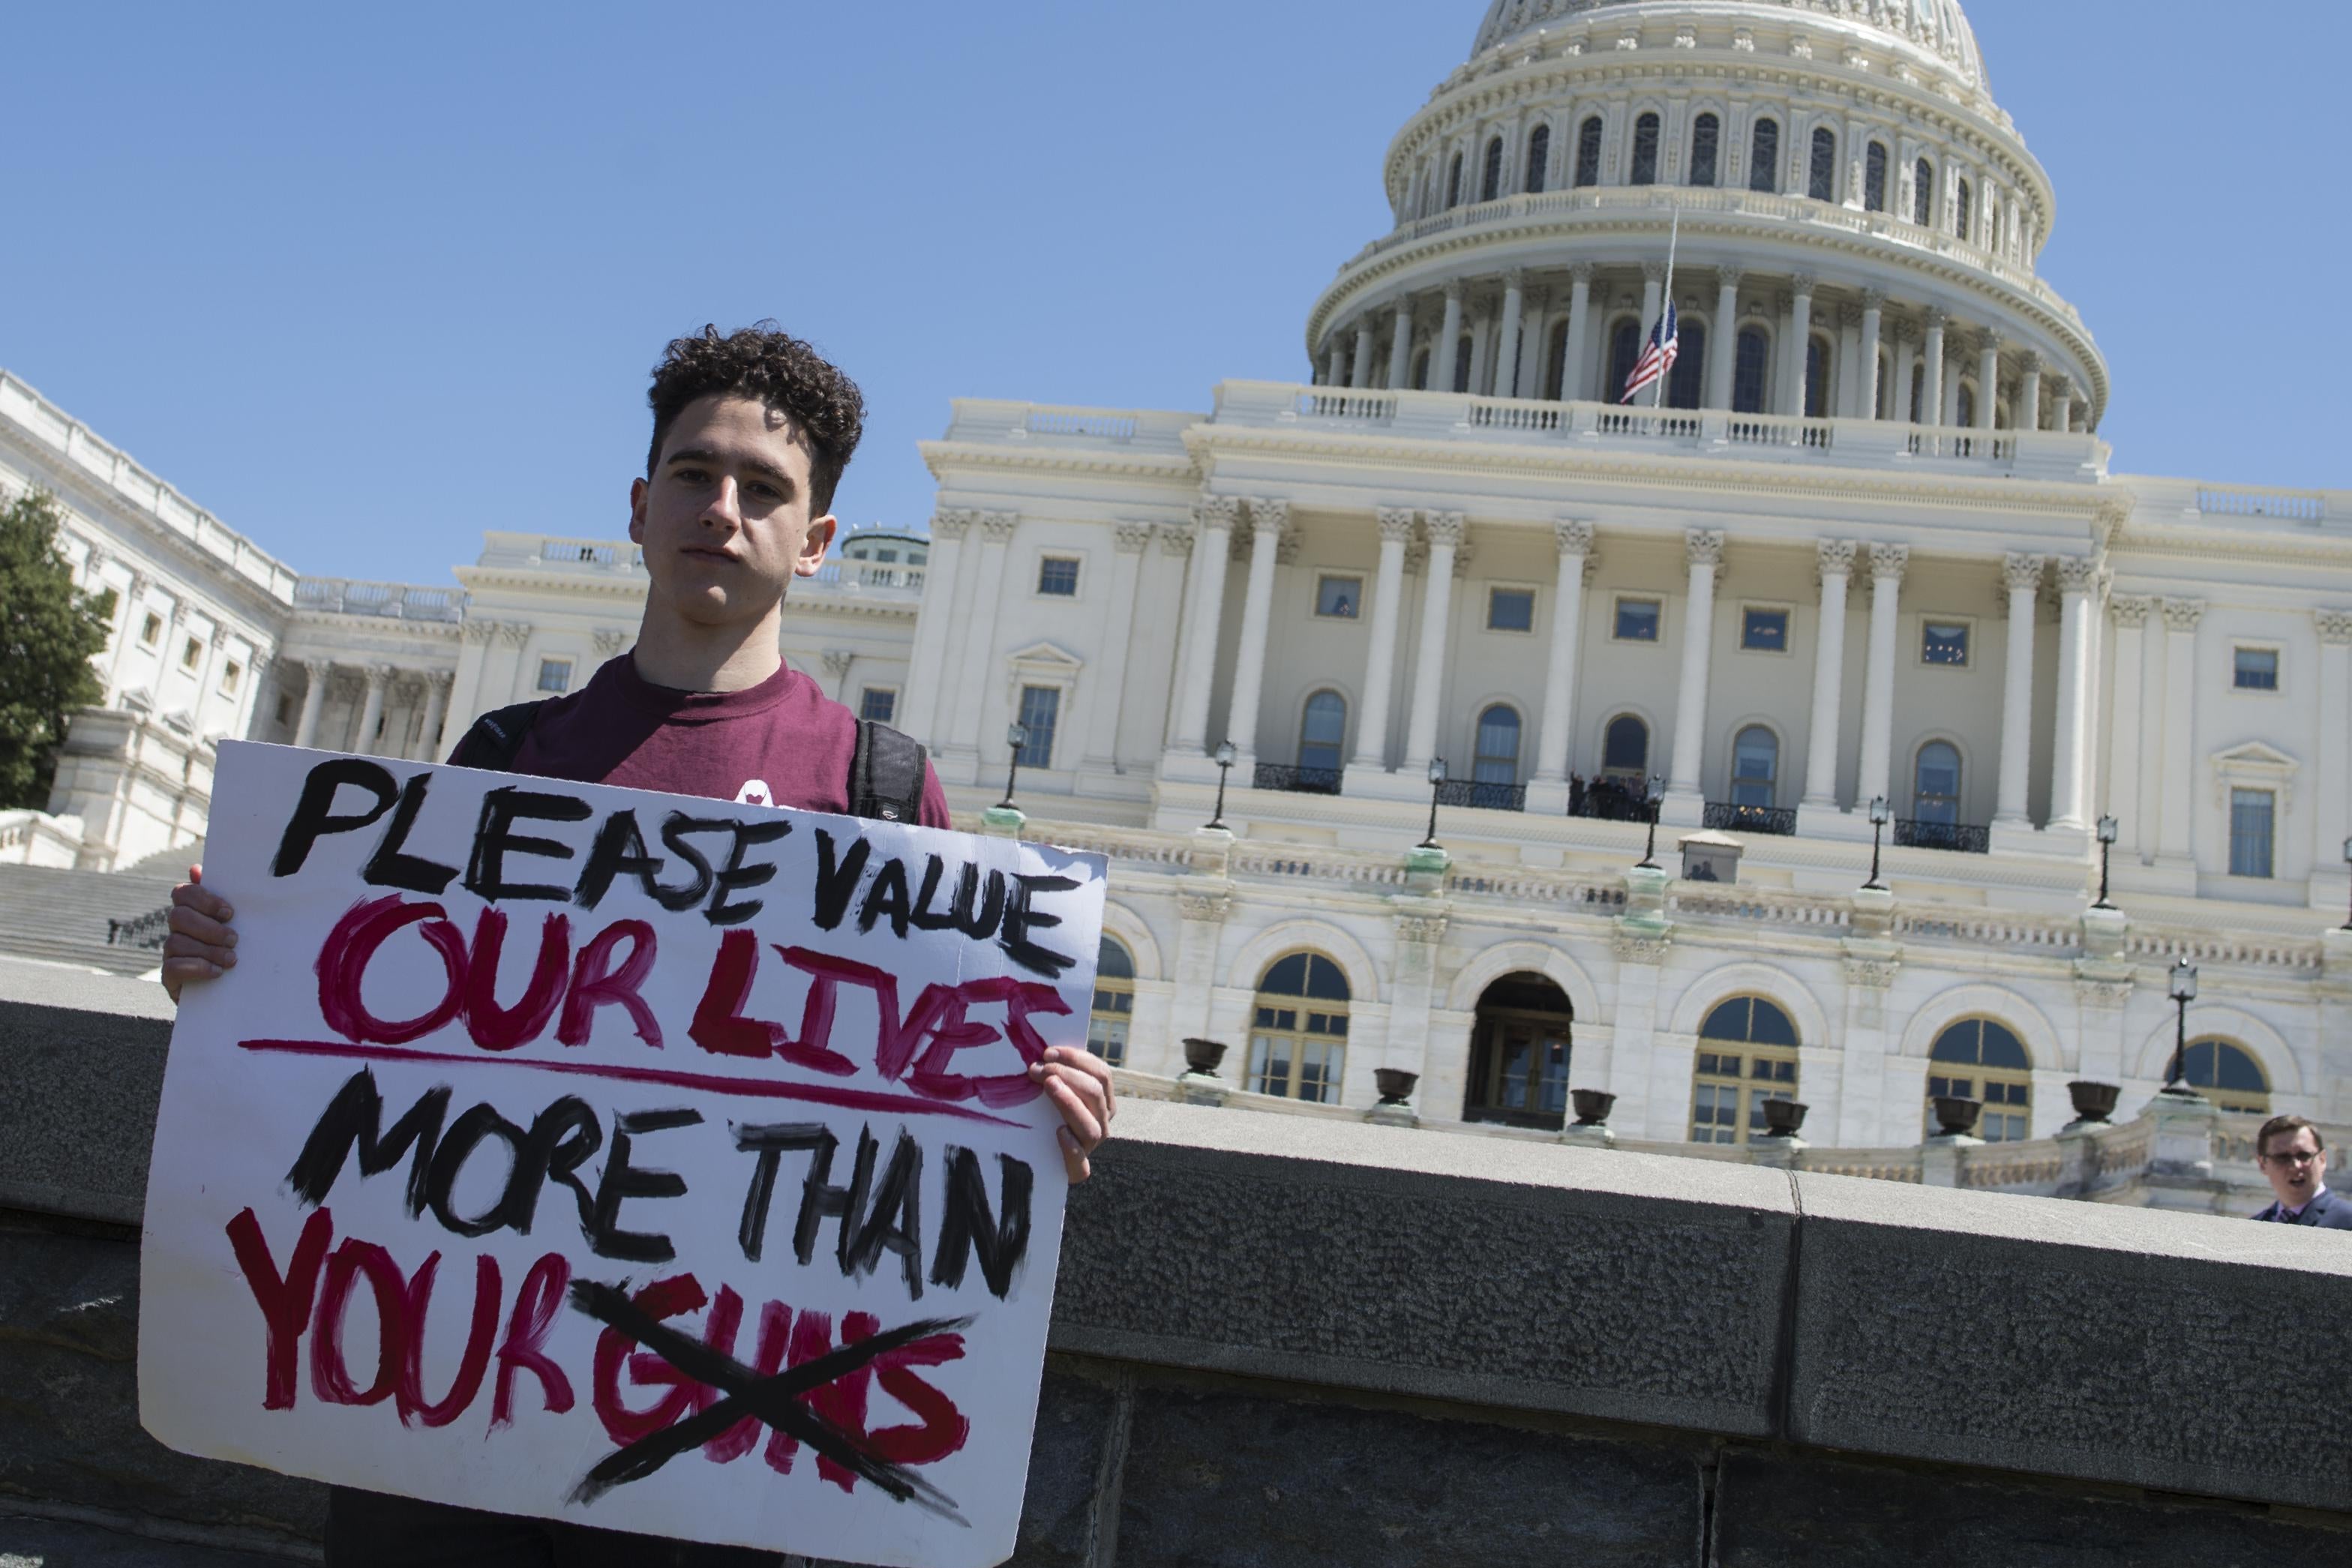 Amit Dadon, a graduate in 2017 from Marjory Stoneman Douglas High School, poses for a photo on the West Lawn of the US Capitol after rallying with several hundred fellow students to call for stricter gun laws in Washington, DC on April 20, 2018.